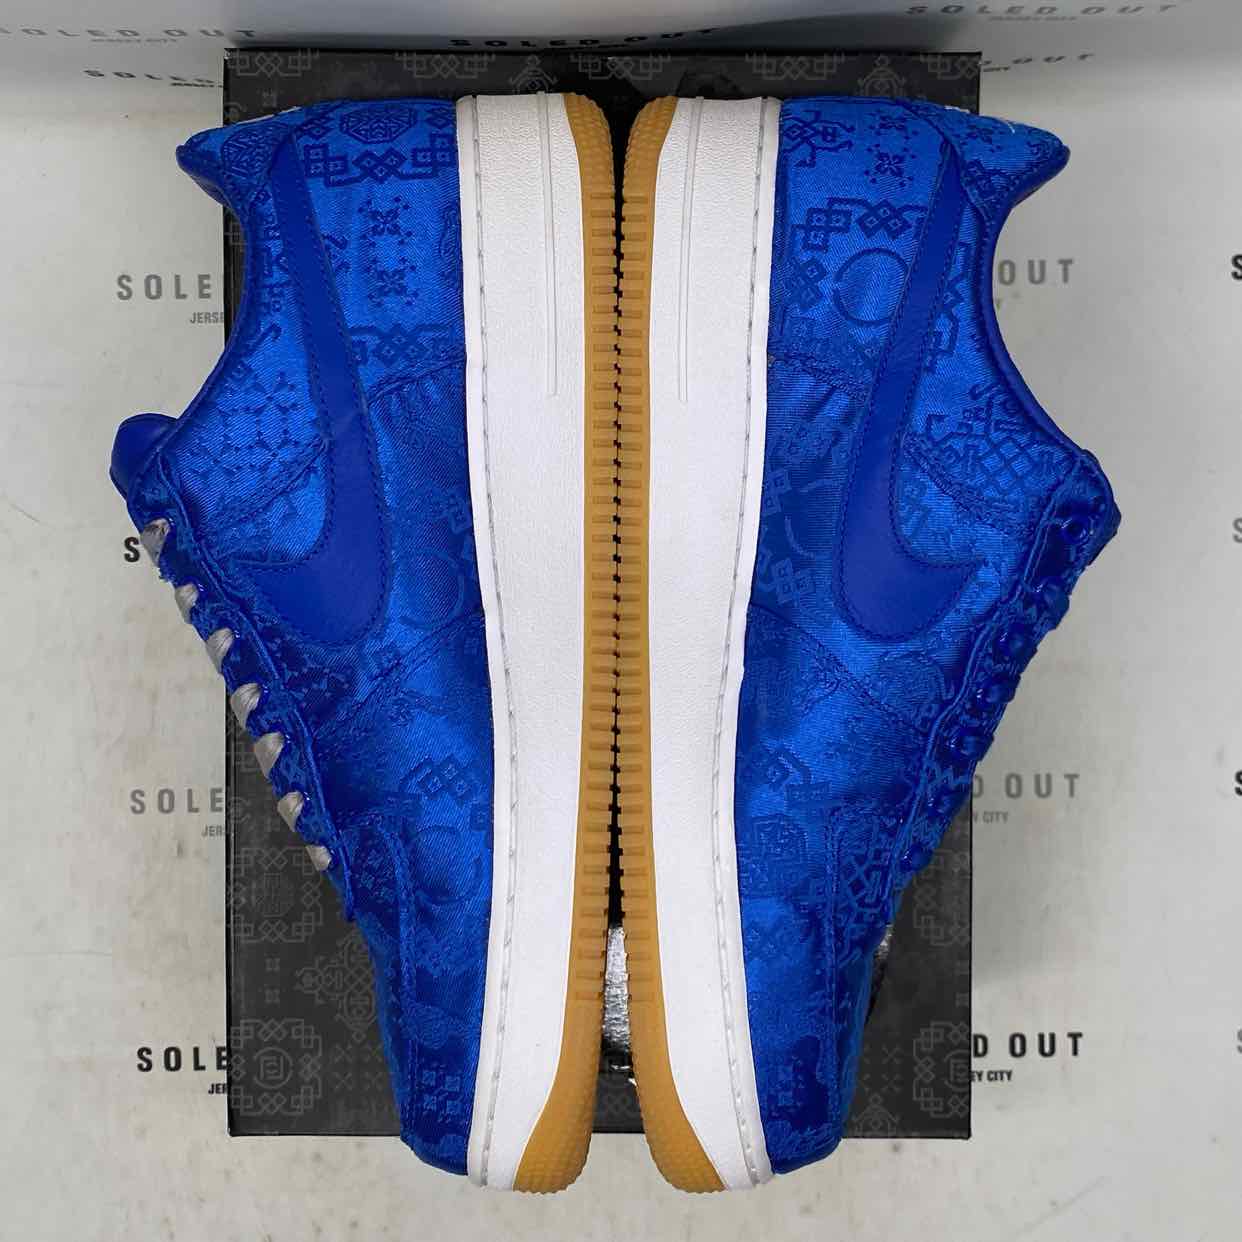 Nike Air Force 1 Low "Blue Silk Clot" 2019 Used Size 11